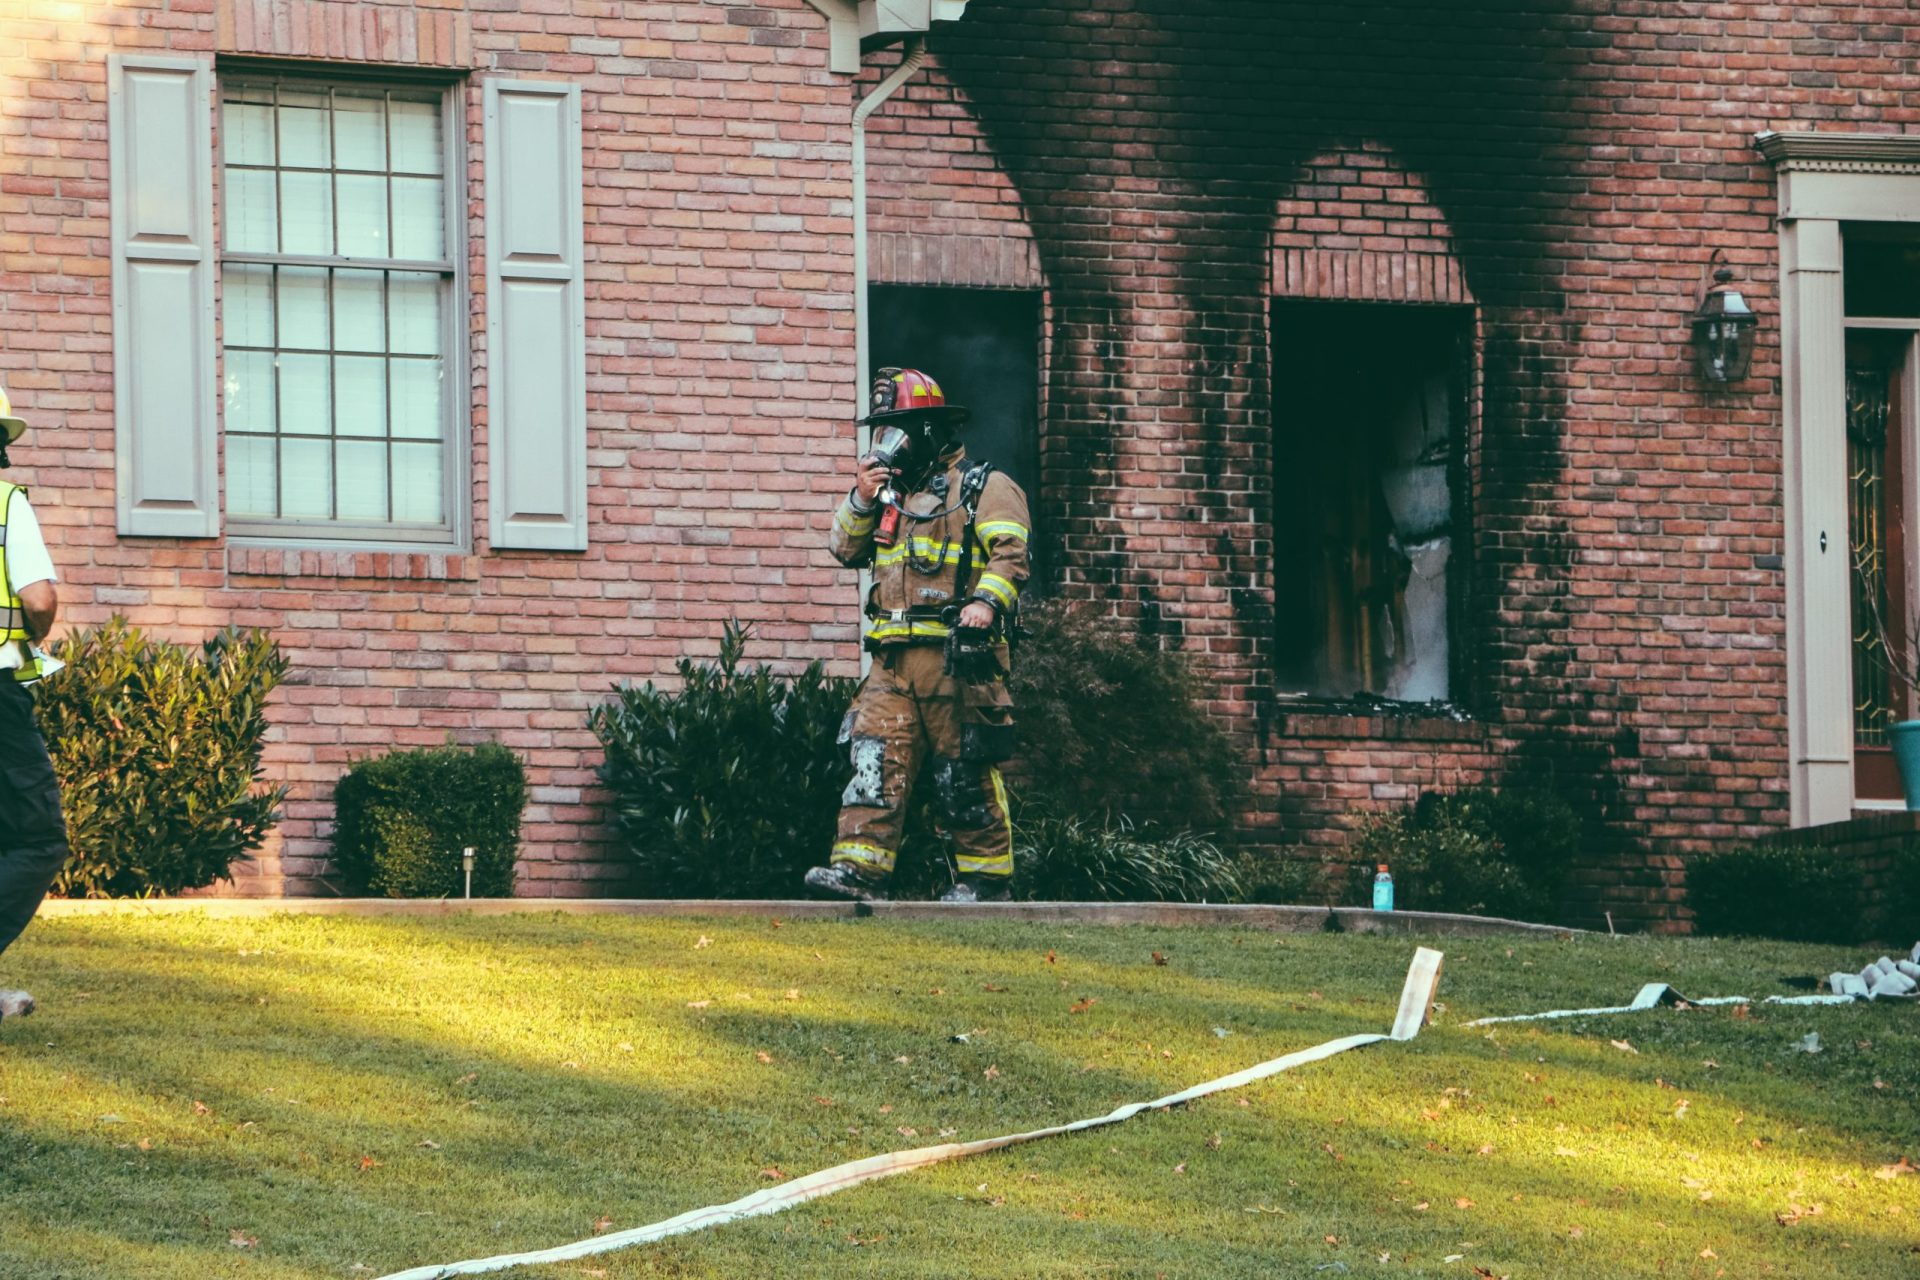 Firefighter walking out of a house